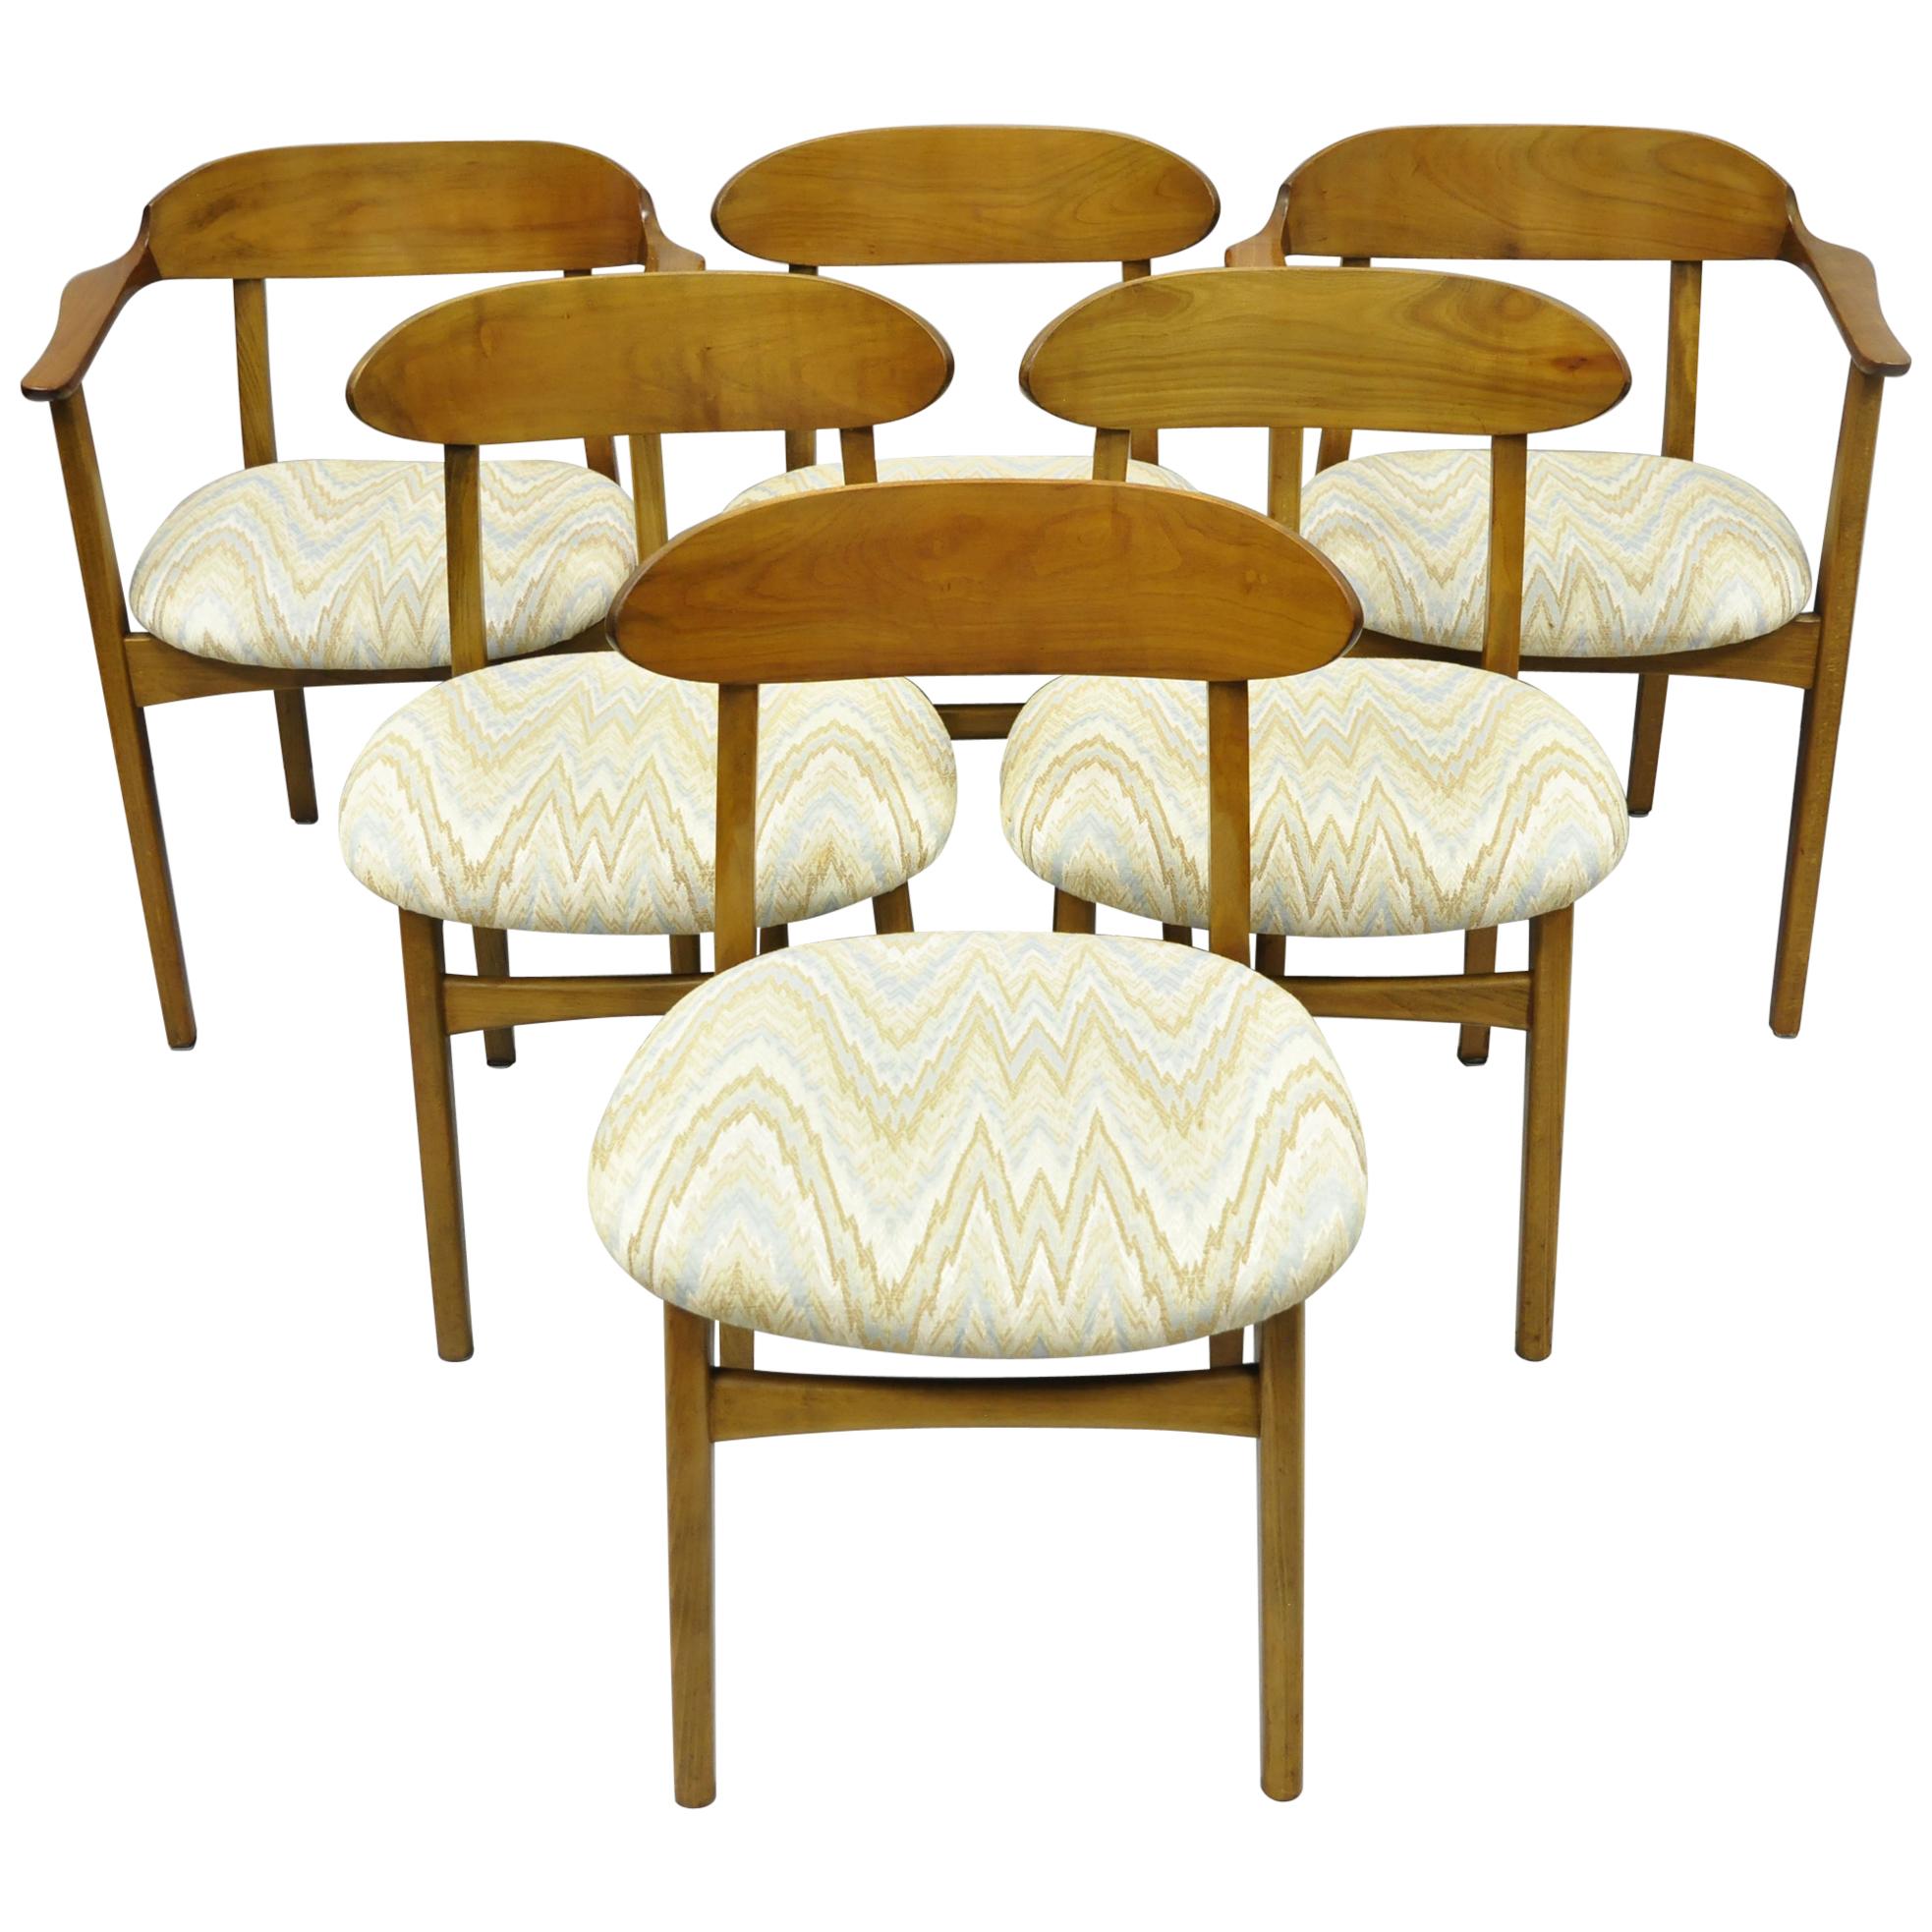 Six Vintage Mid-Century Modern Sculpted Walnut Barrel Back Dining Room Chairs